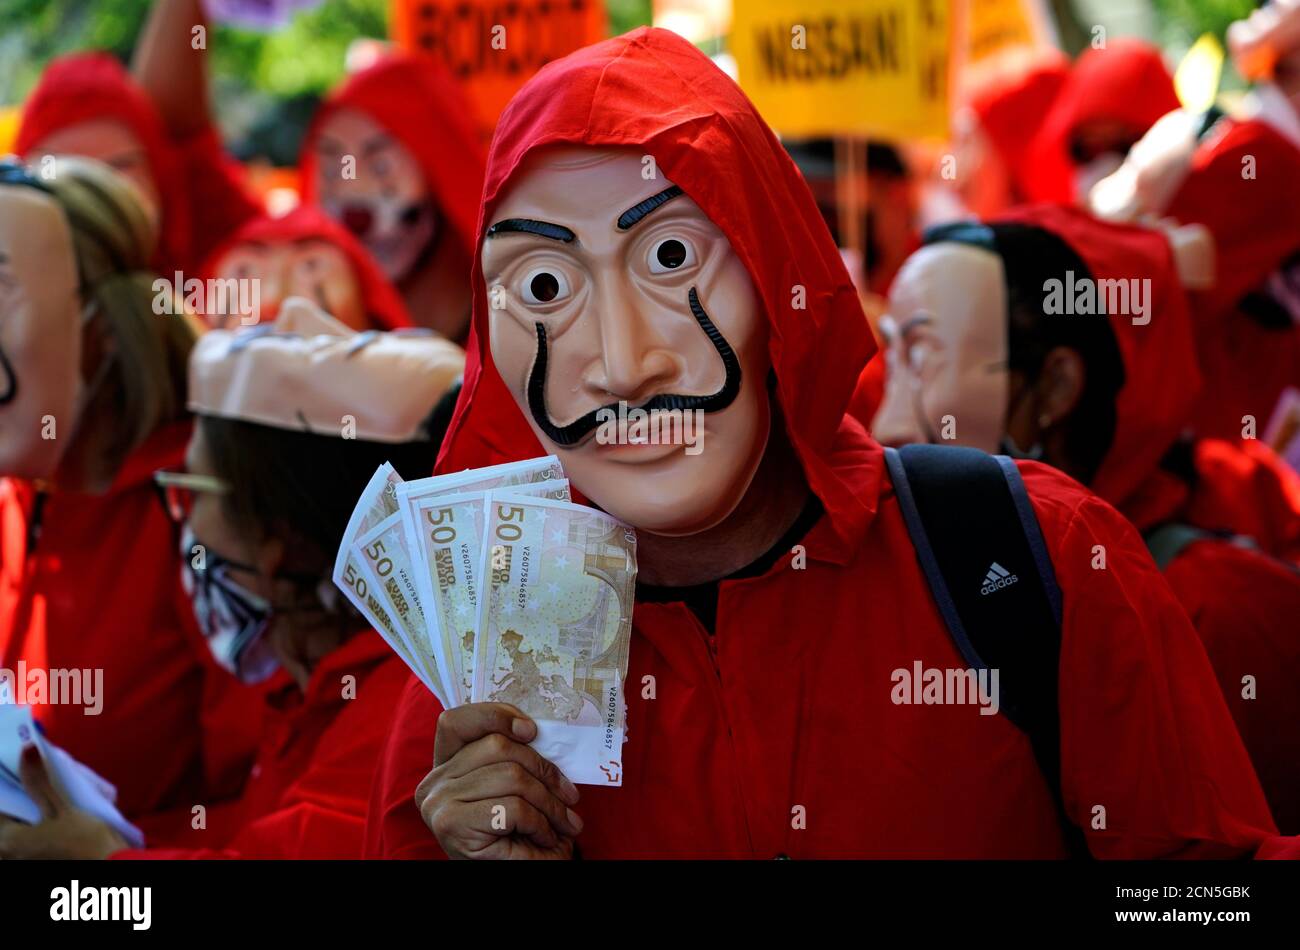 A Nissan worker dressed in a costume from 